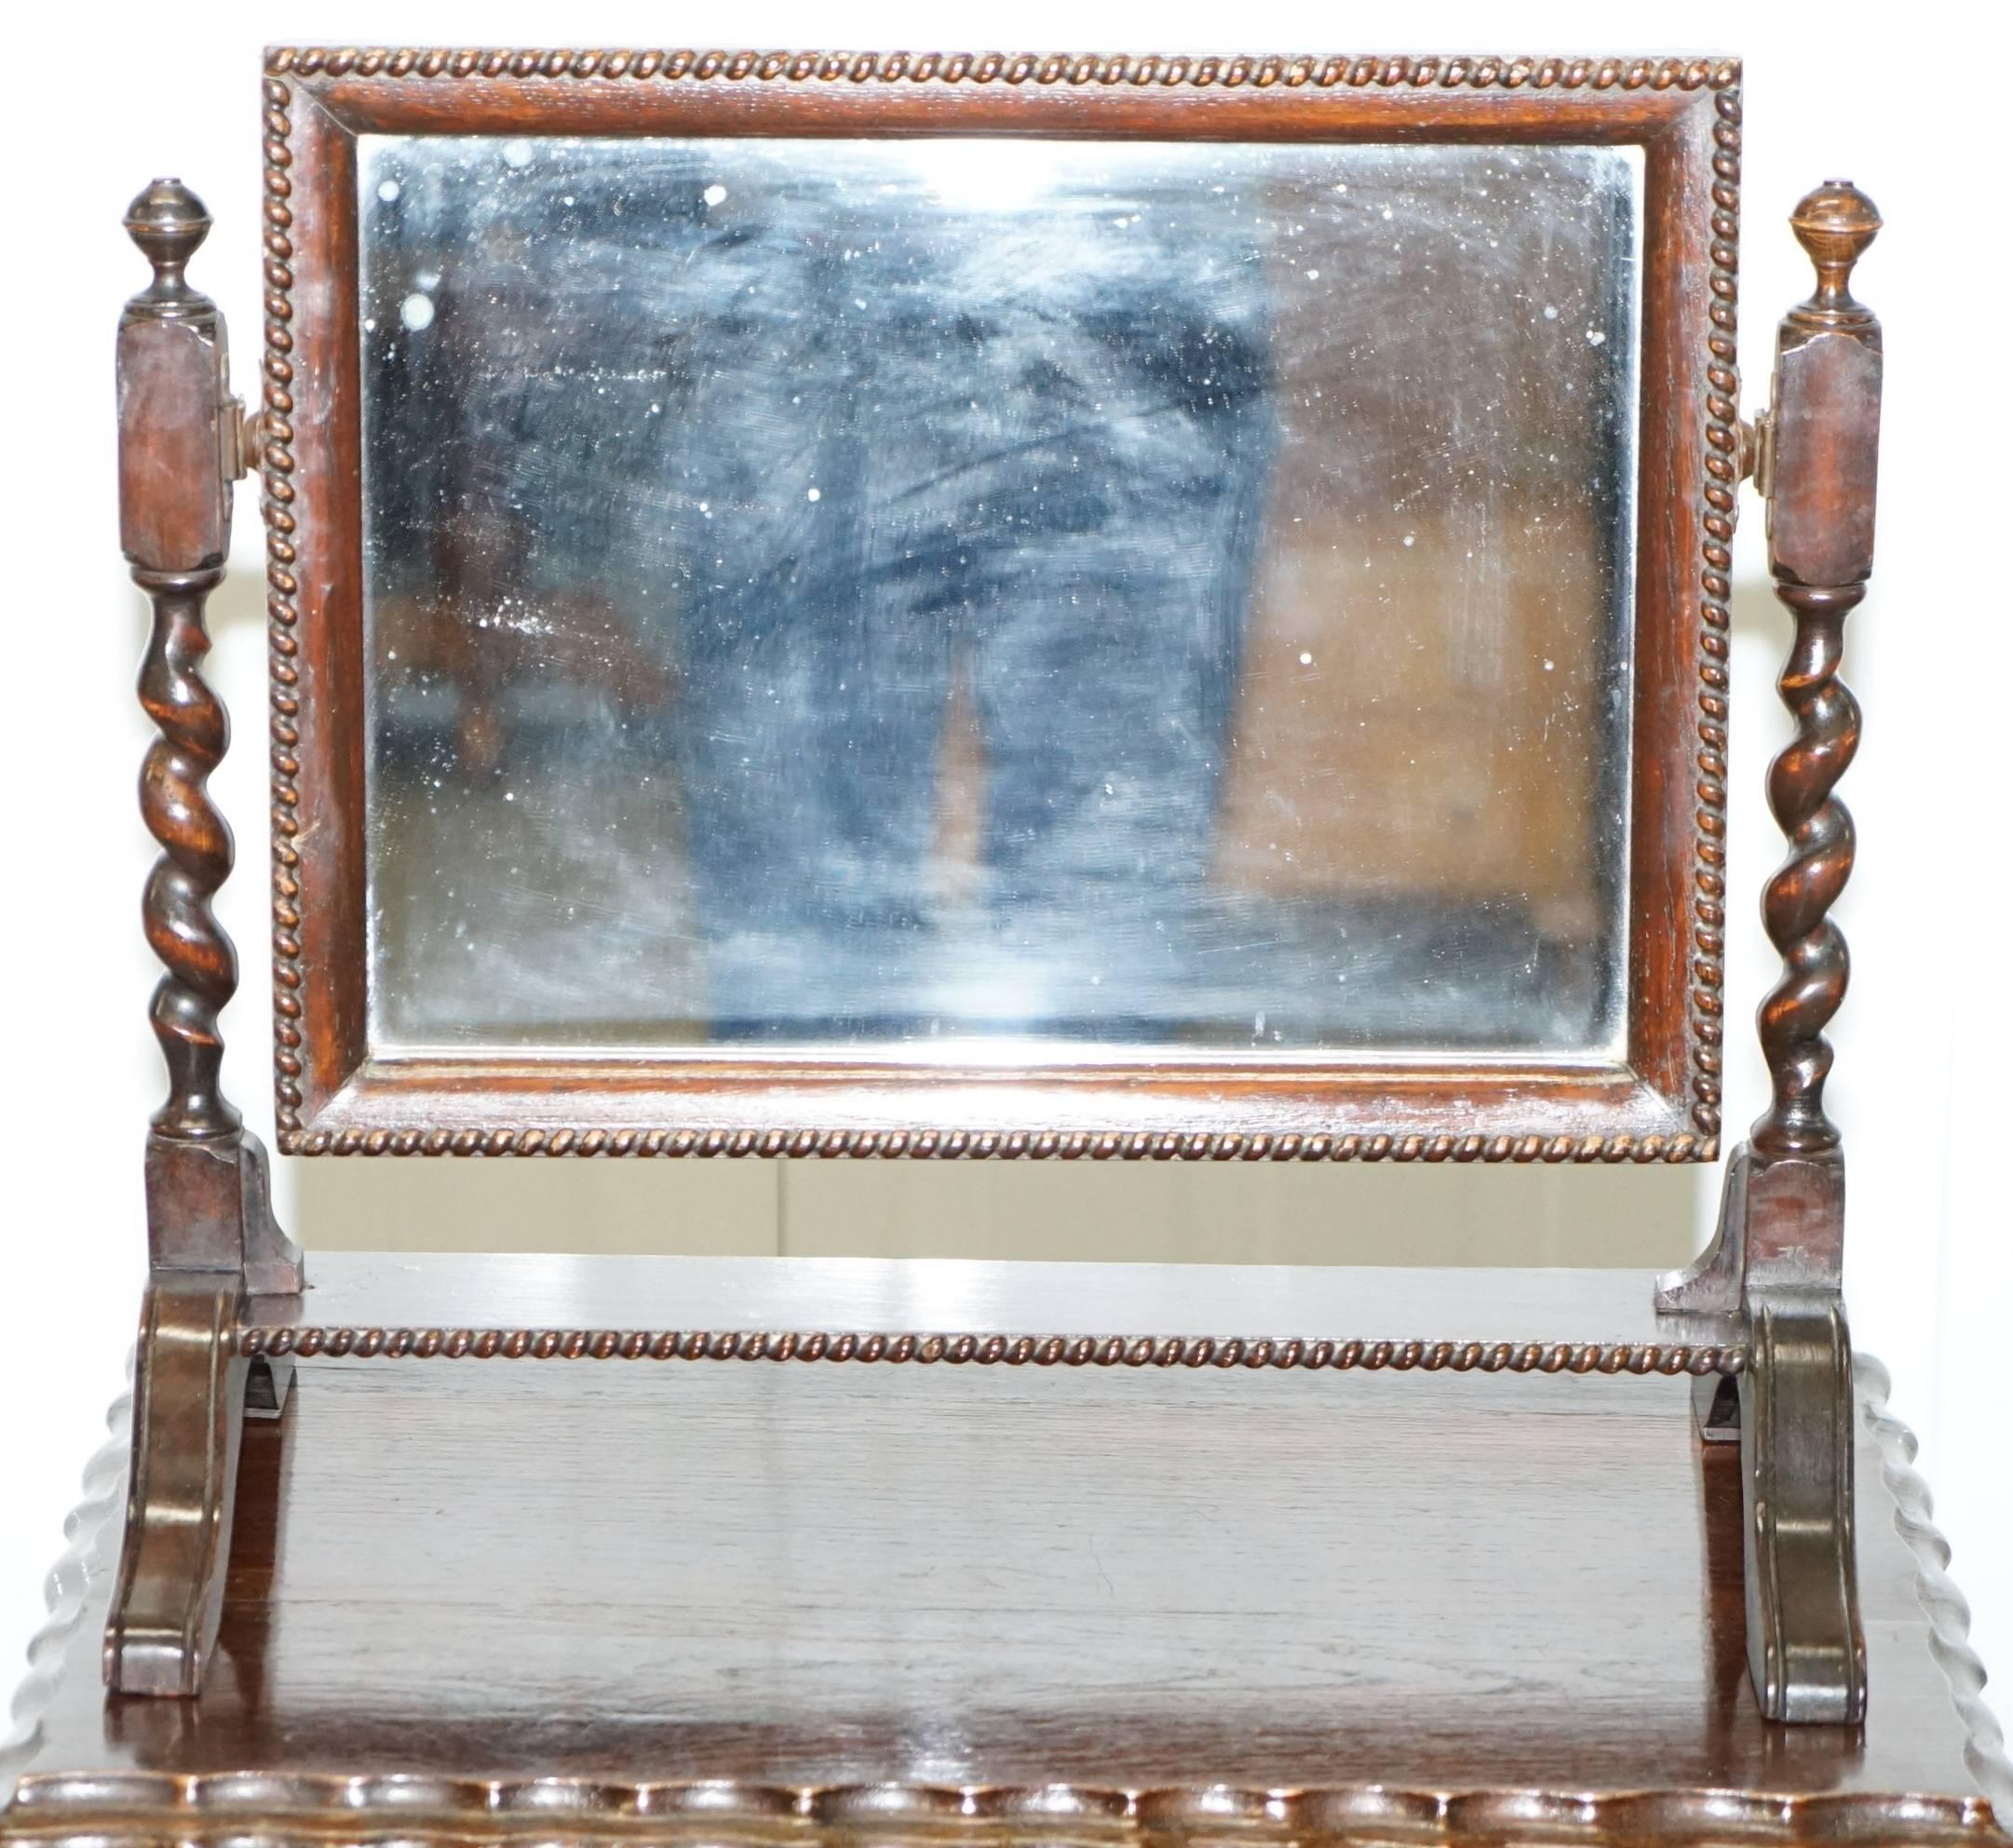 We are delighted to offer for sale very nice Regency table top cherval mirror with barley twist frame and original plate glass.

A sweet little piece in great condition throughout for the period, the movement is nice, the glass free from any